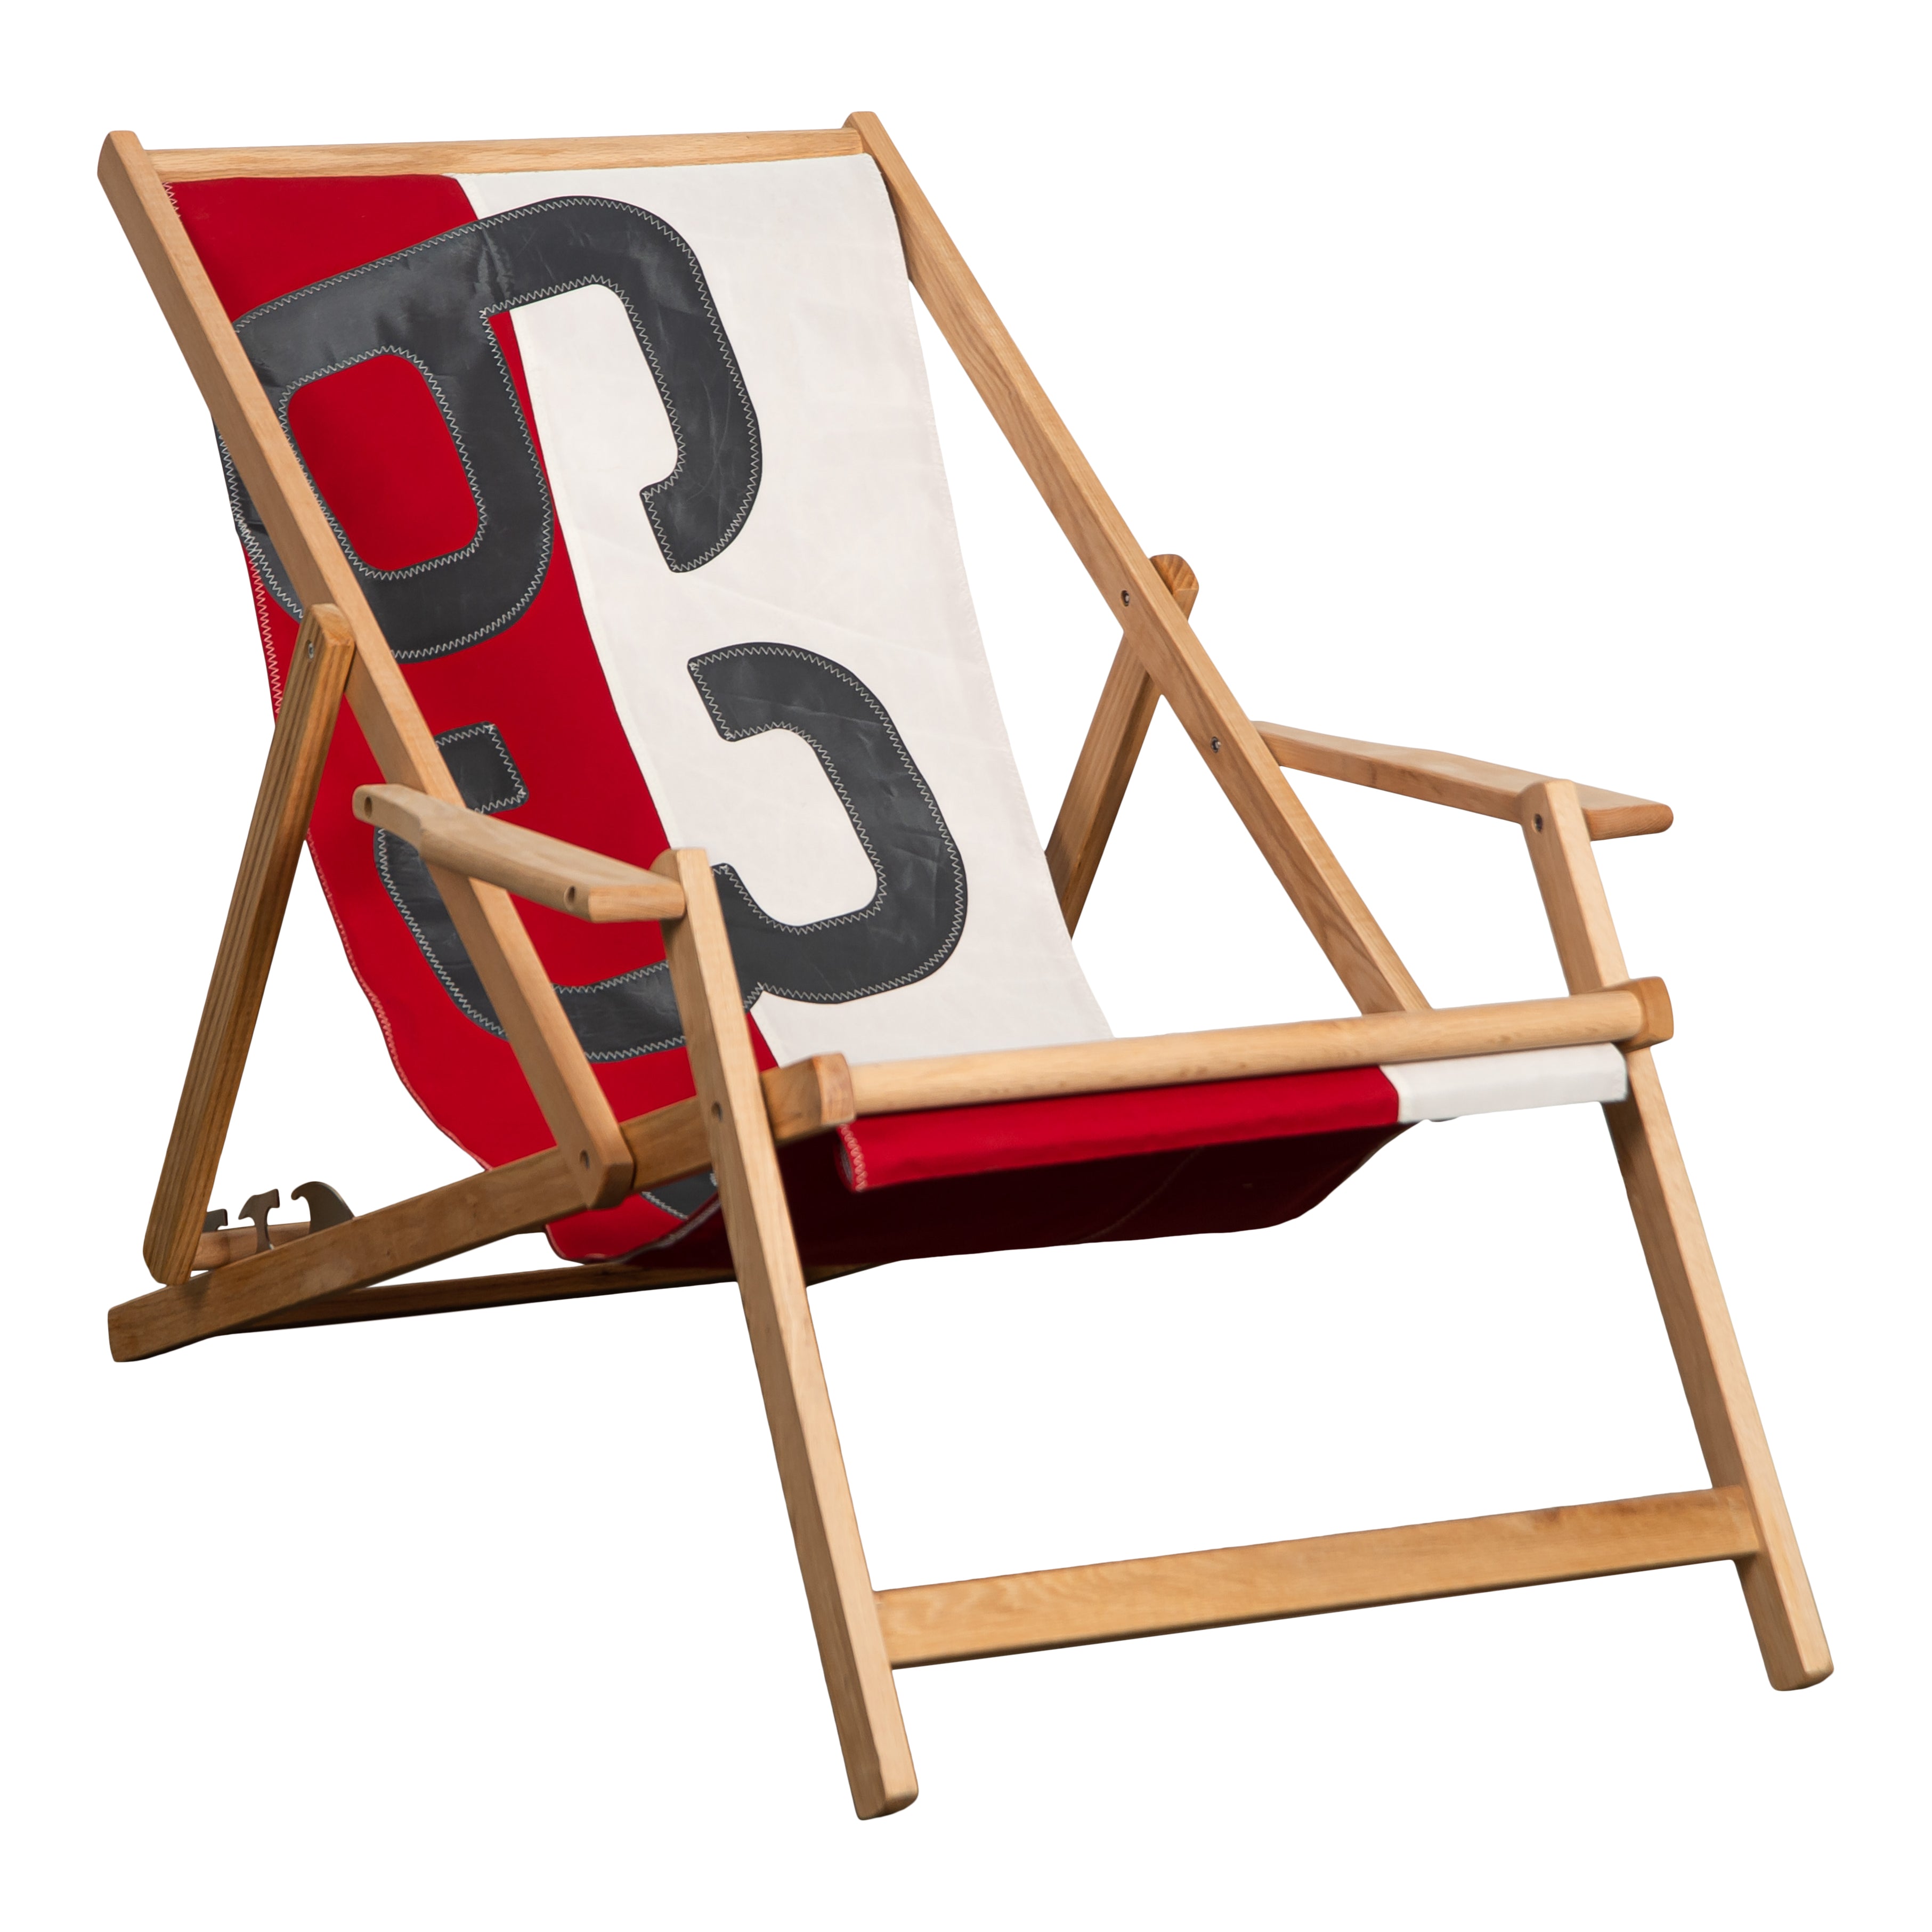 Hurley Red Beach Chair